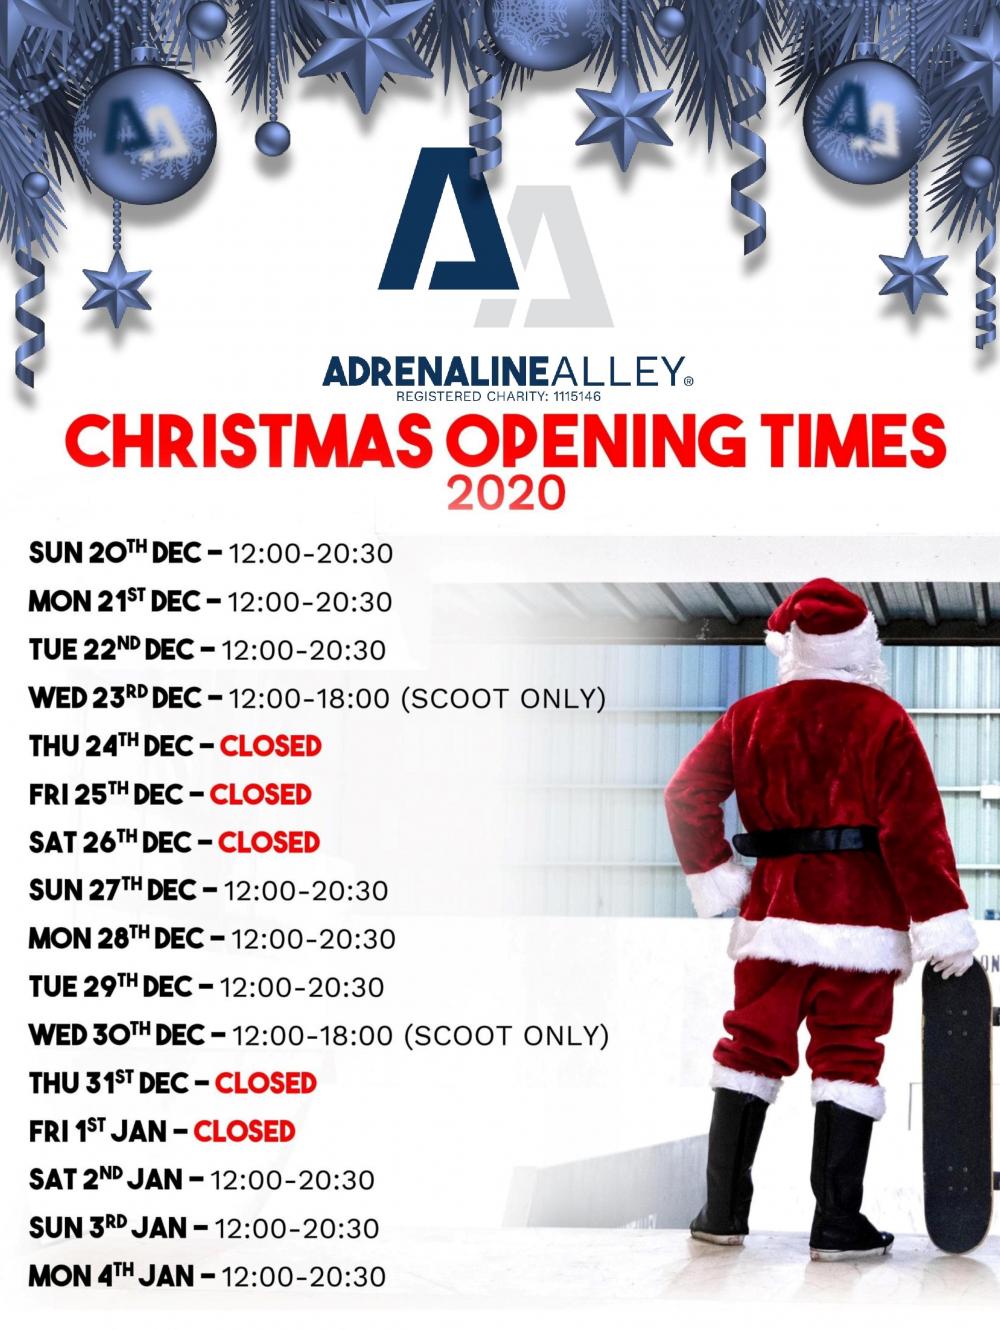 CHRISTMAS OPENING TIMES 2020